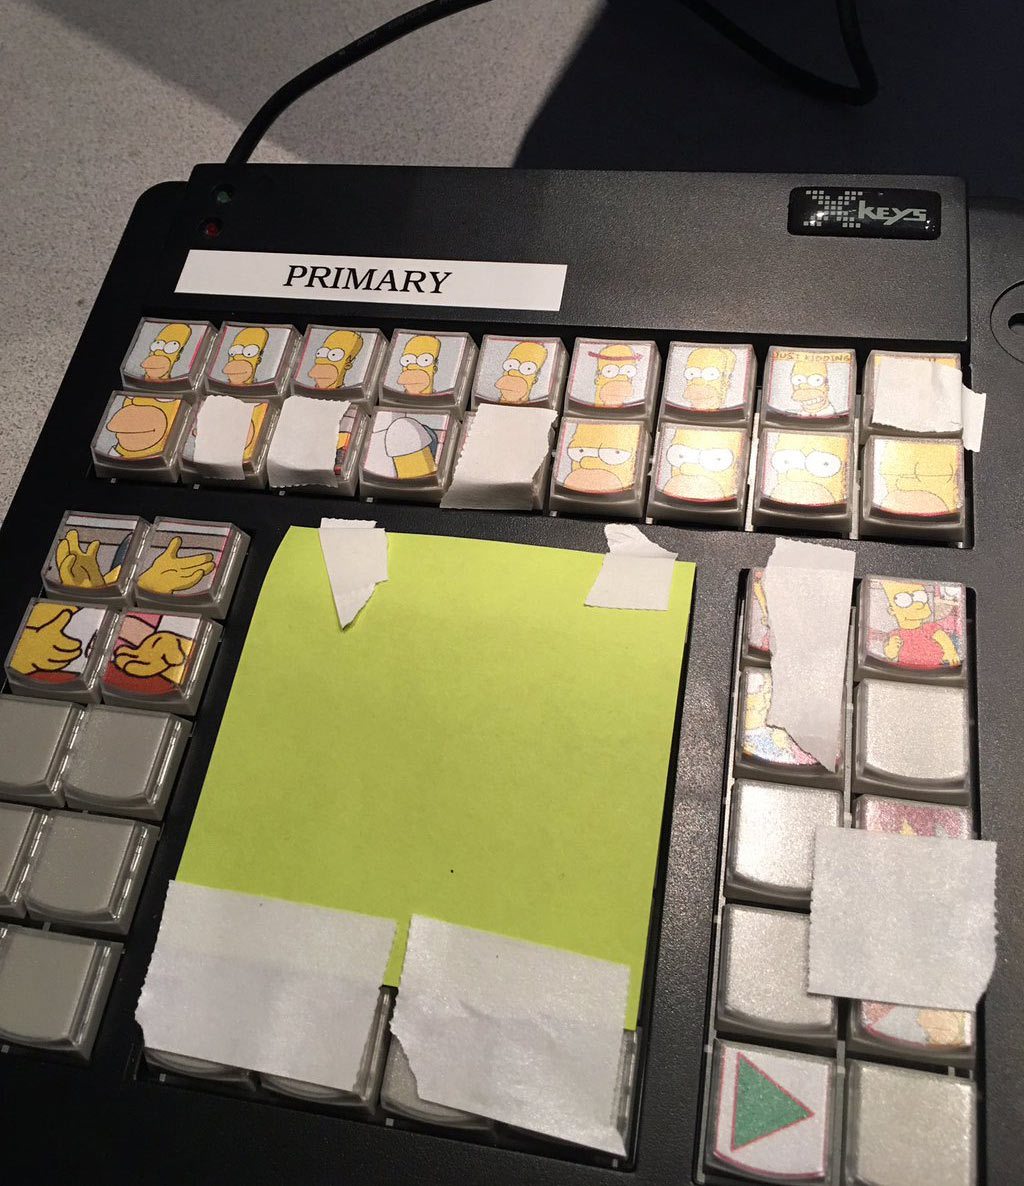 David Silverman posted this image of the keypad he used to control pre-animated elements for The Simpsons live segment.